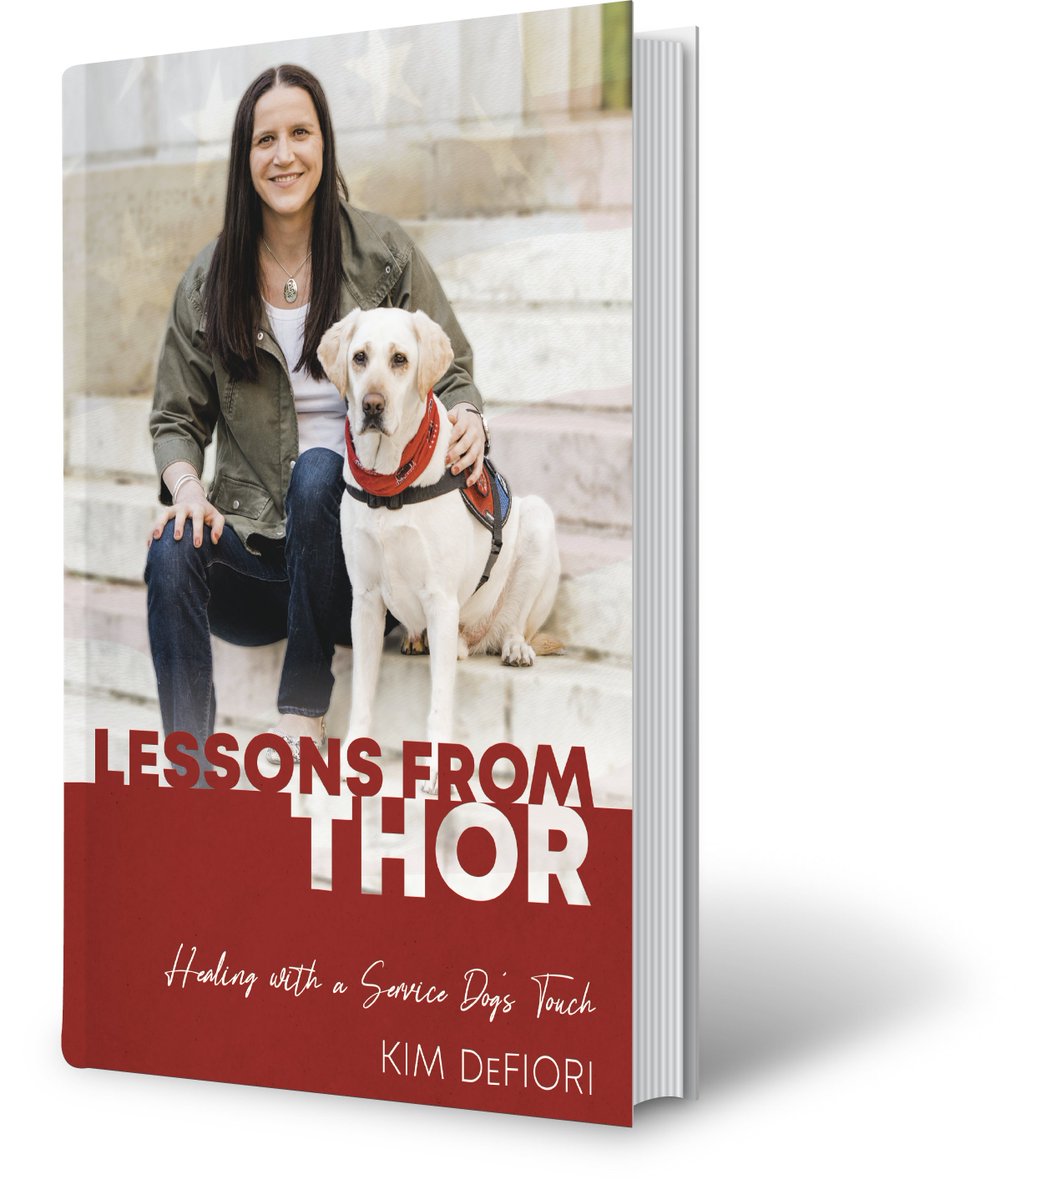 Meet author Kim DeFiori and get a signed copy of Lessons from Thor. Early birds will receive a free gift.
https://t.co/IYZu6v1b8u
#Party  #Book #Story #Event https://t.co/qbSufy0bd1